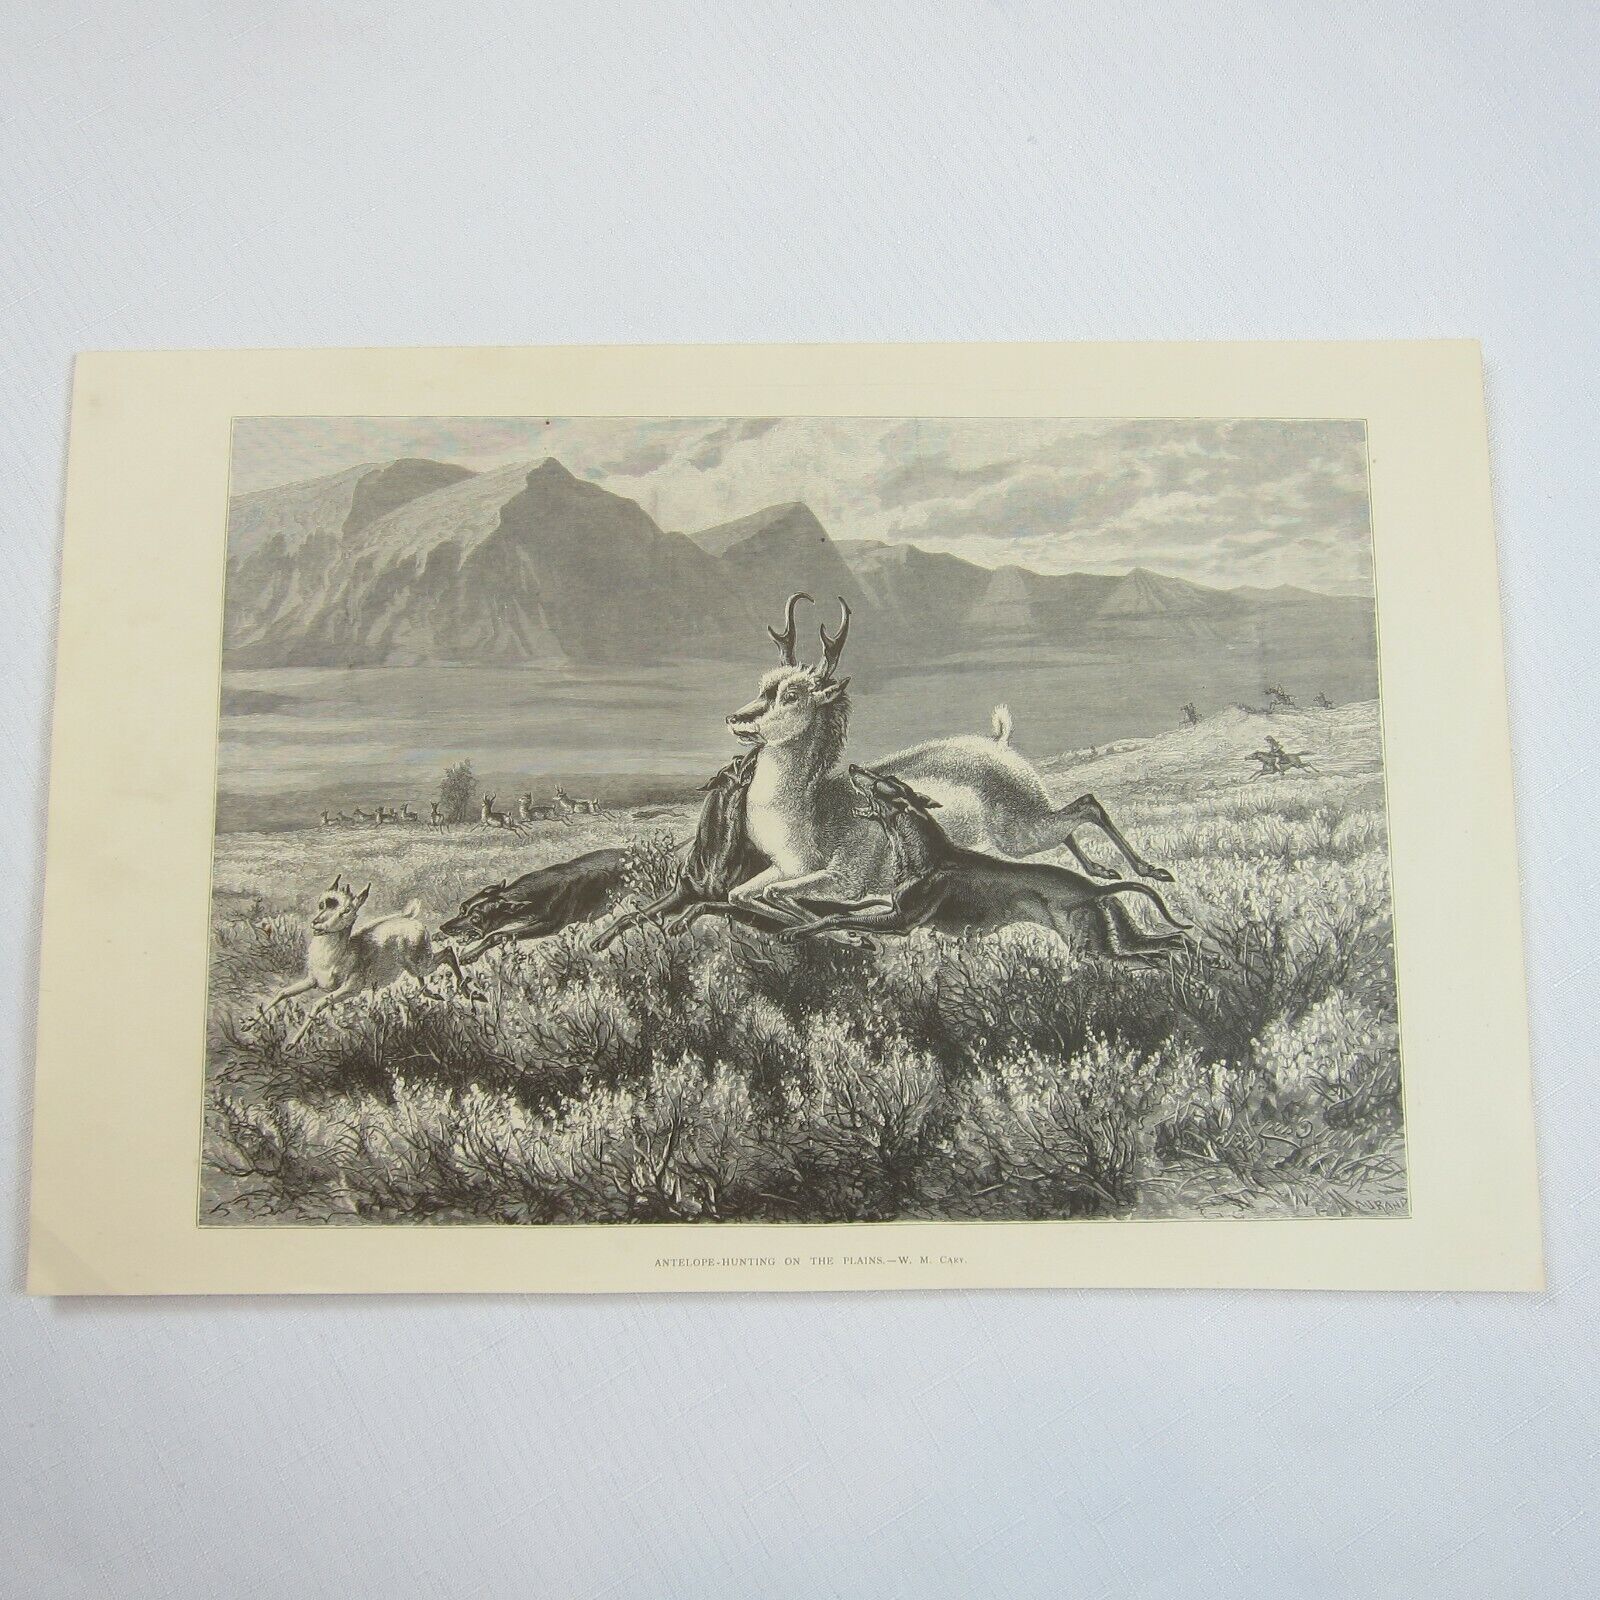 Antique 1874 Engraving Print Antelope-Hunting on the Plains, WM Cary, The Aldine